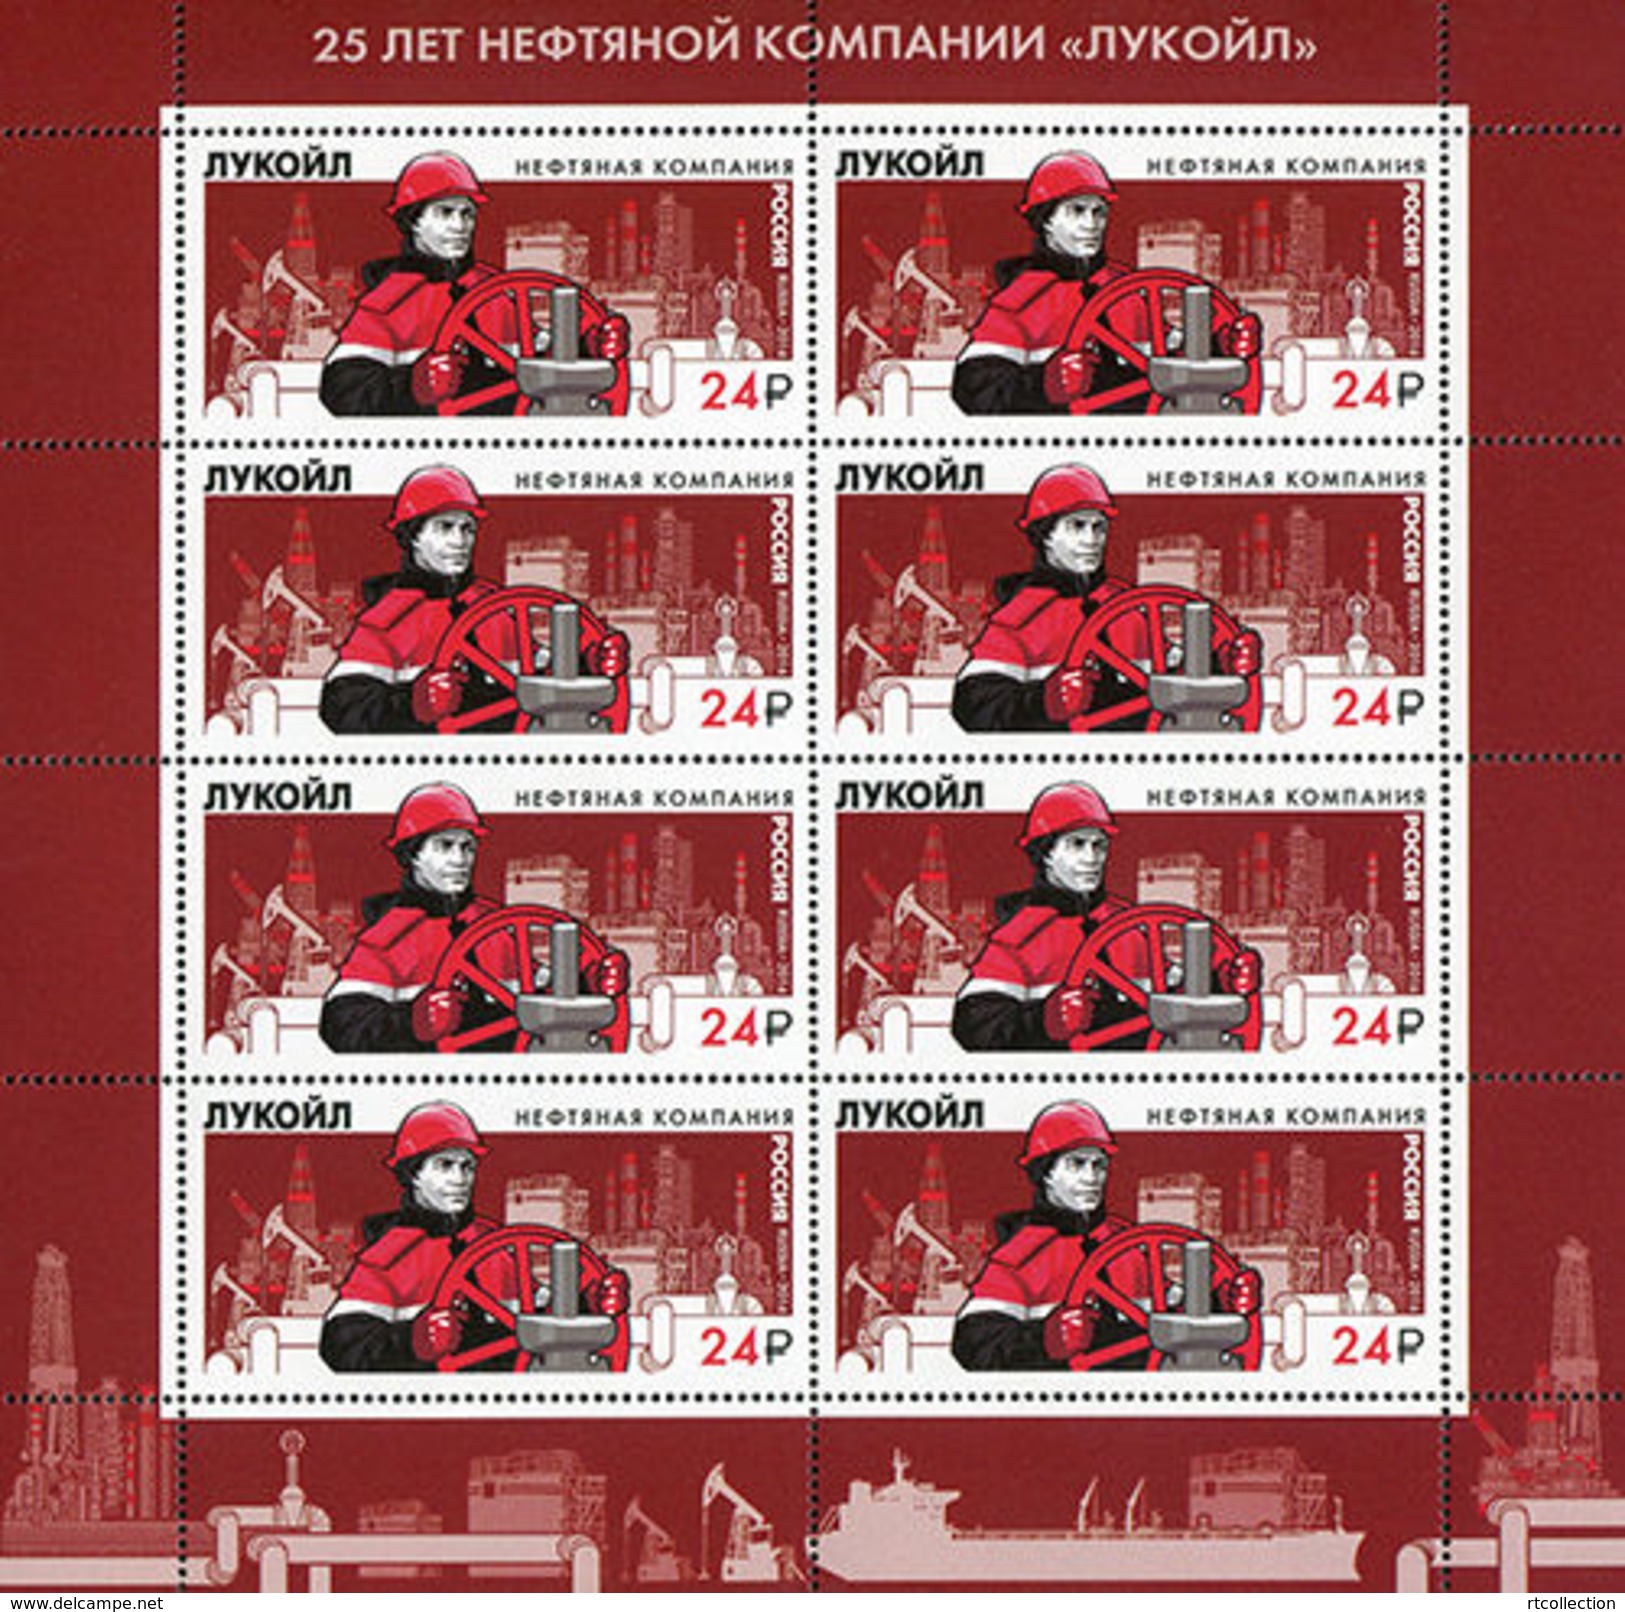 Russia 2016 Sheet Oil Company Lukoil Mining Trade Industry Organizations People Stamps Michel KLB 2355 - Hojas Completas